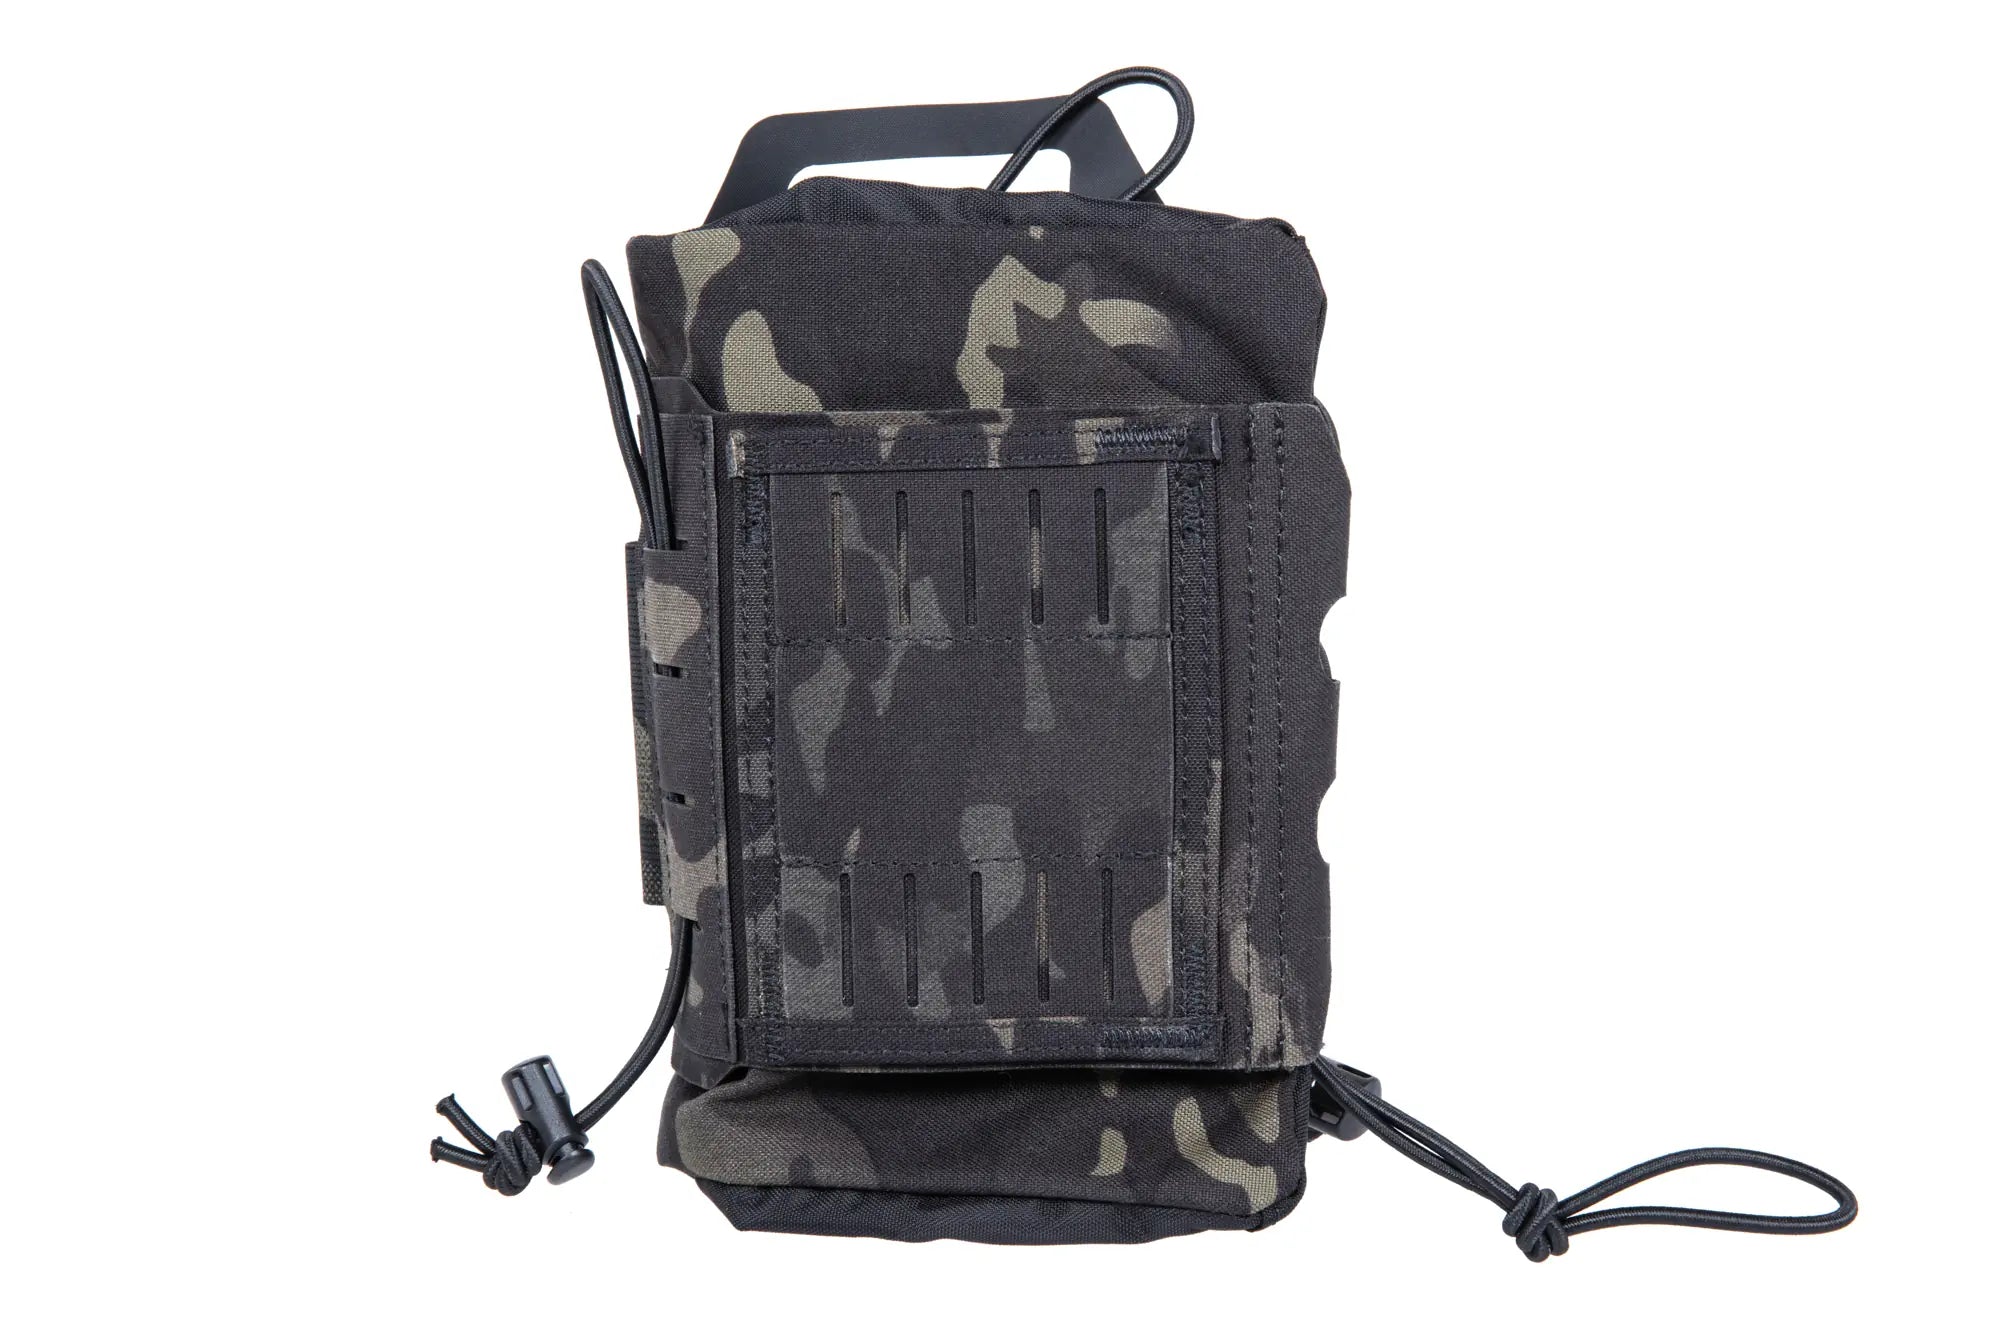 Wosport MultiCam Black tactical tear-off first aid kit